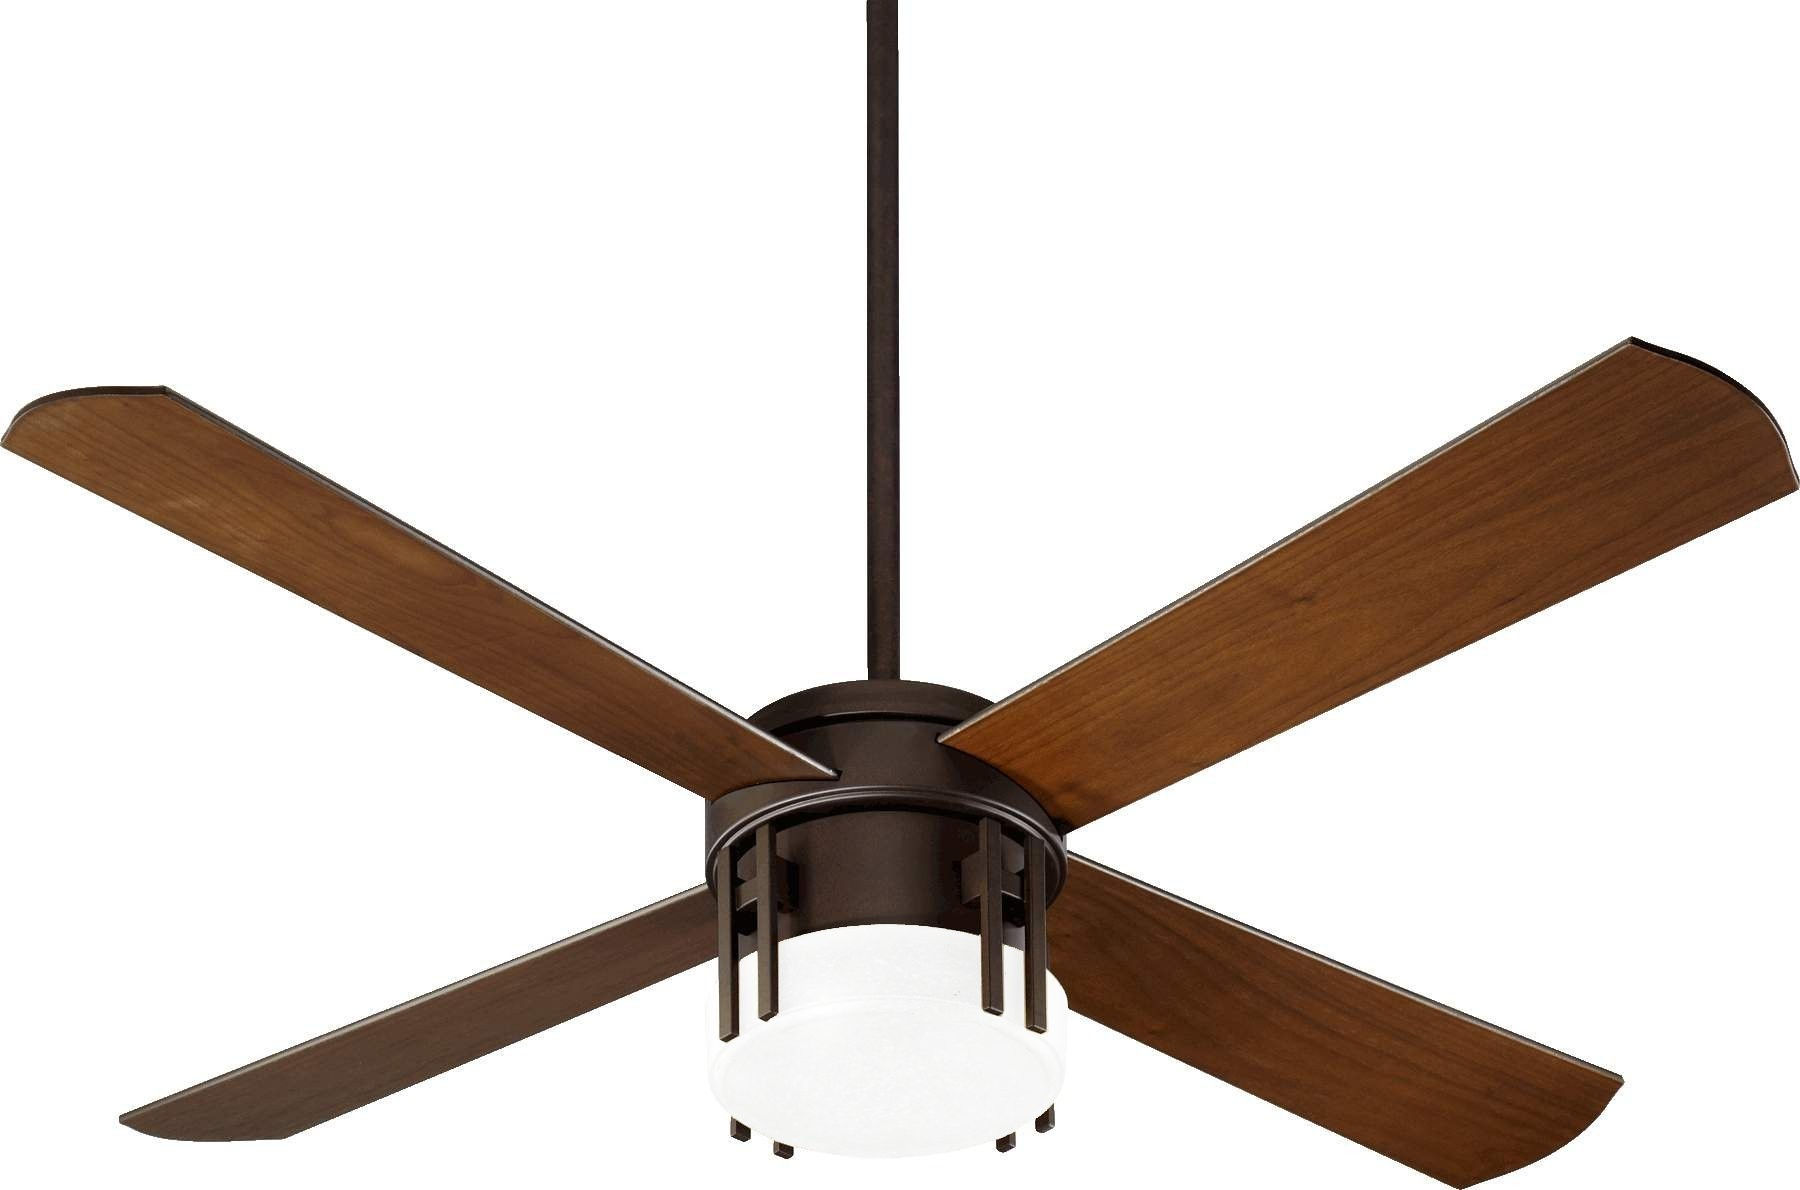 Quorum Mission Ceiling Fan Model 53524 86 In Oiled Bronze in sizing 1800 X 1190